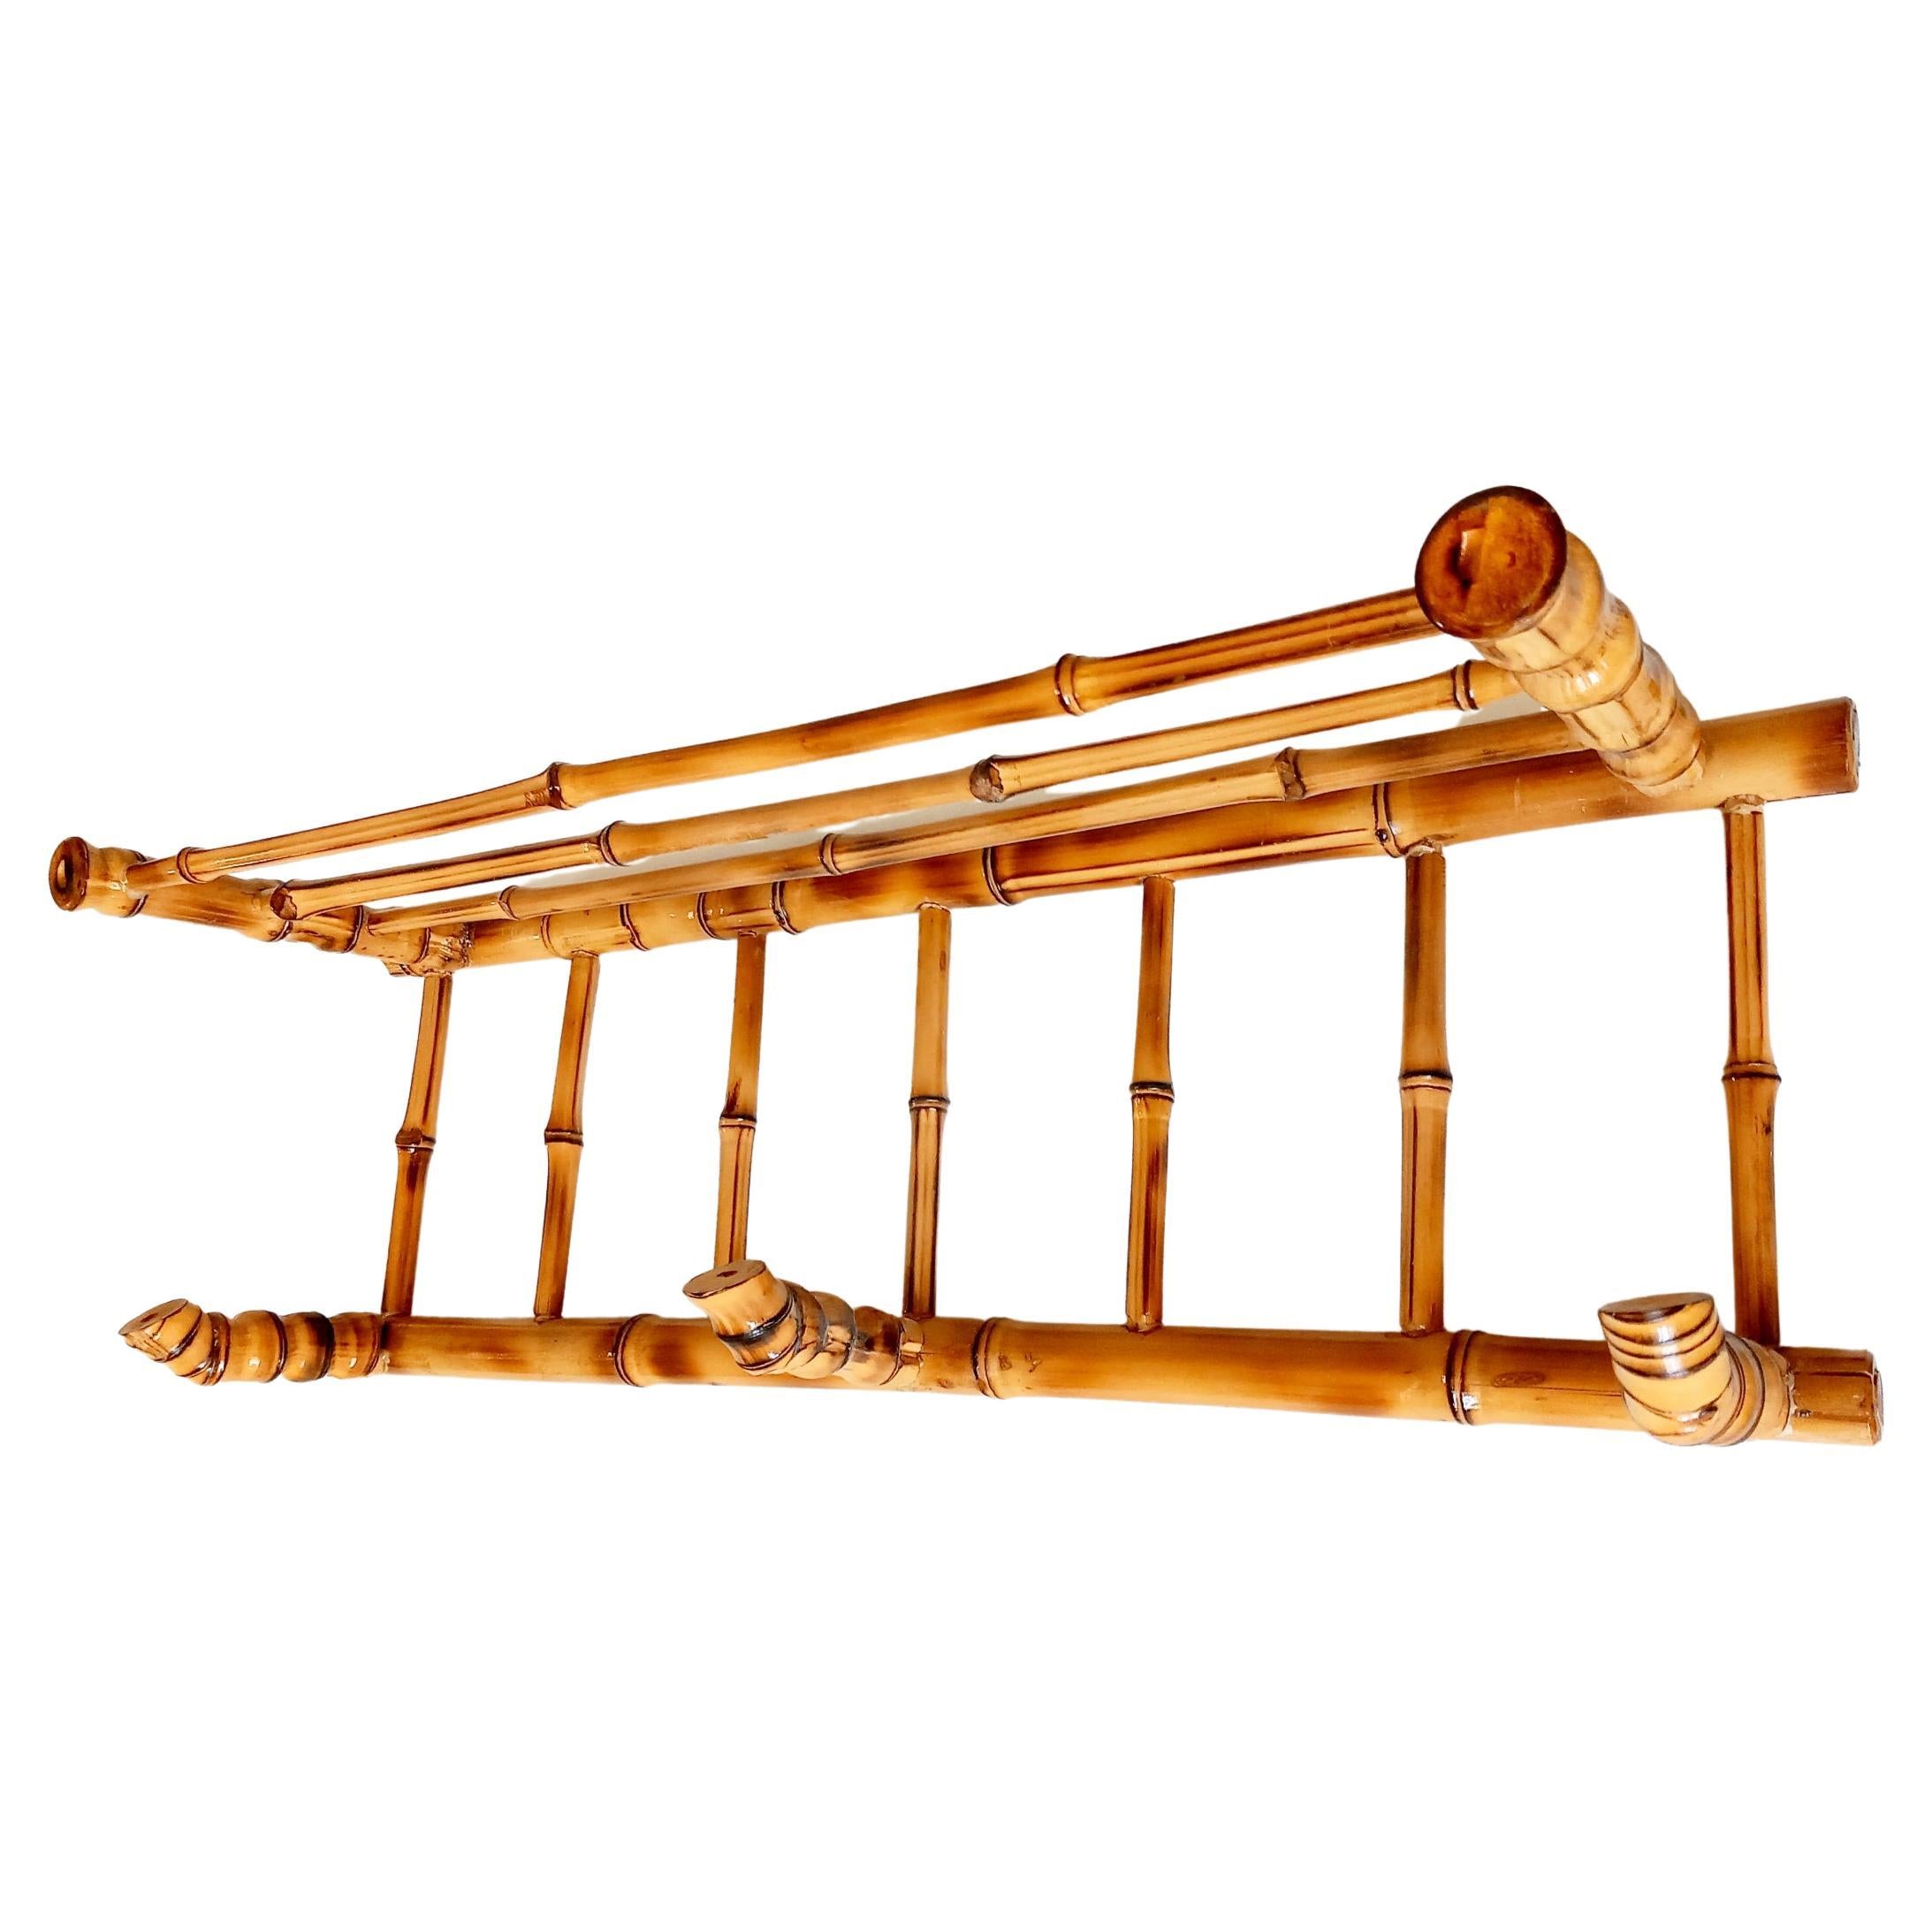 Beautiful Bamboo Coat Rack Three Hangers Top Shelf for Hats or Bags, Spain For Sale